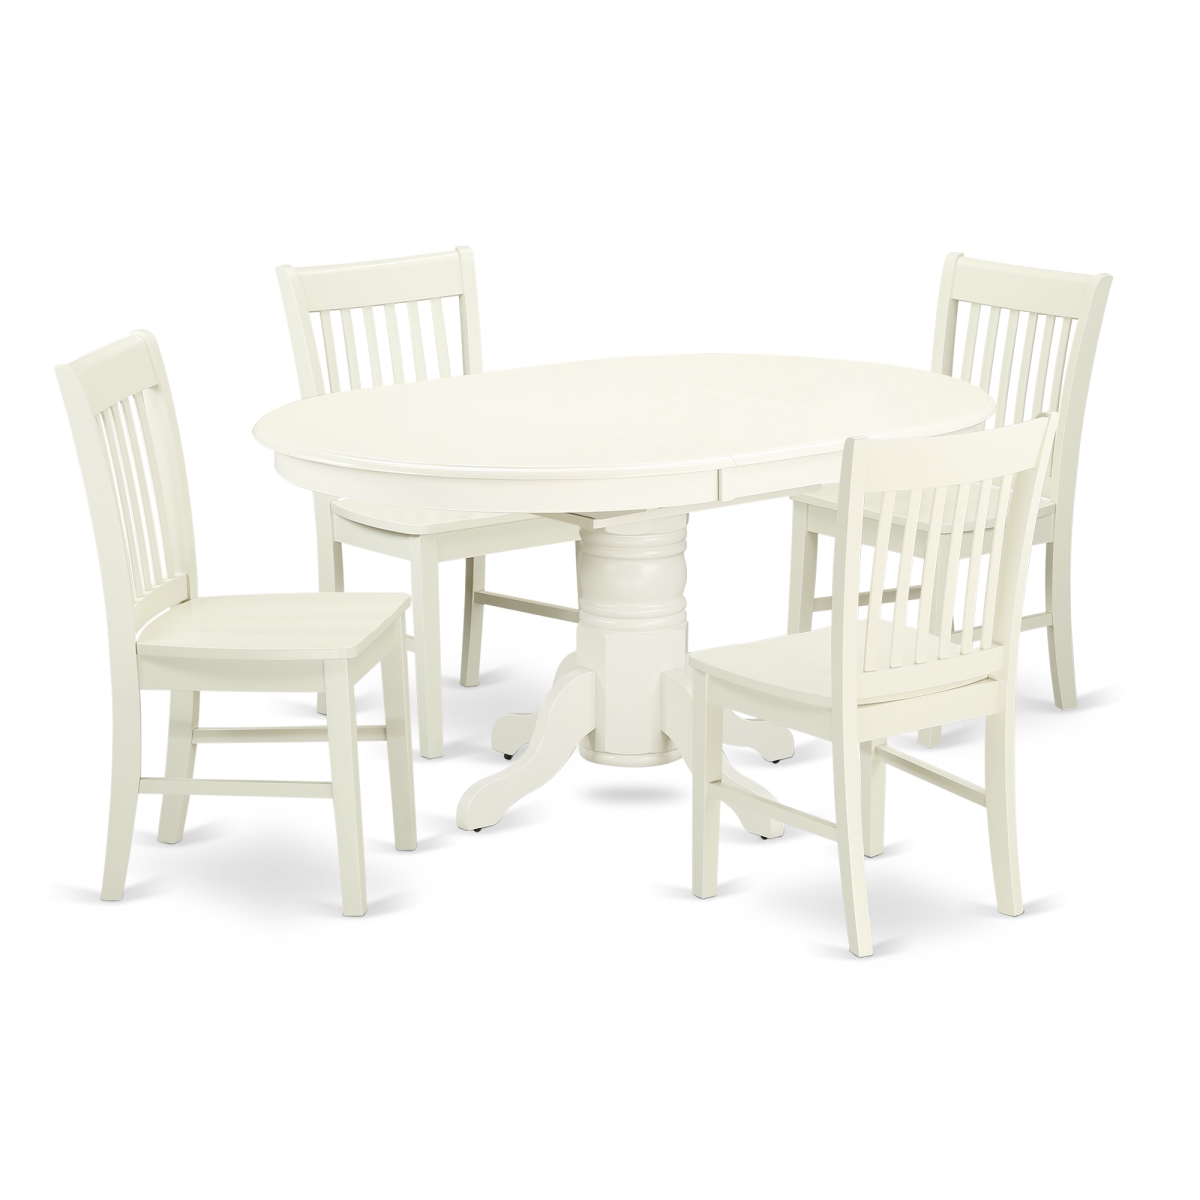 Picture of East West Furniture AVNO5-LWH-W 5 Piece Dining Set, Linen White